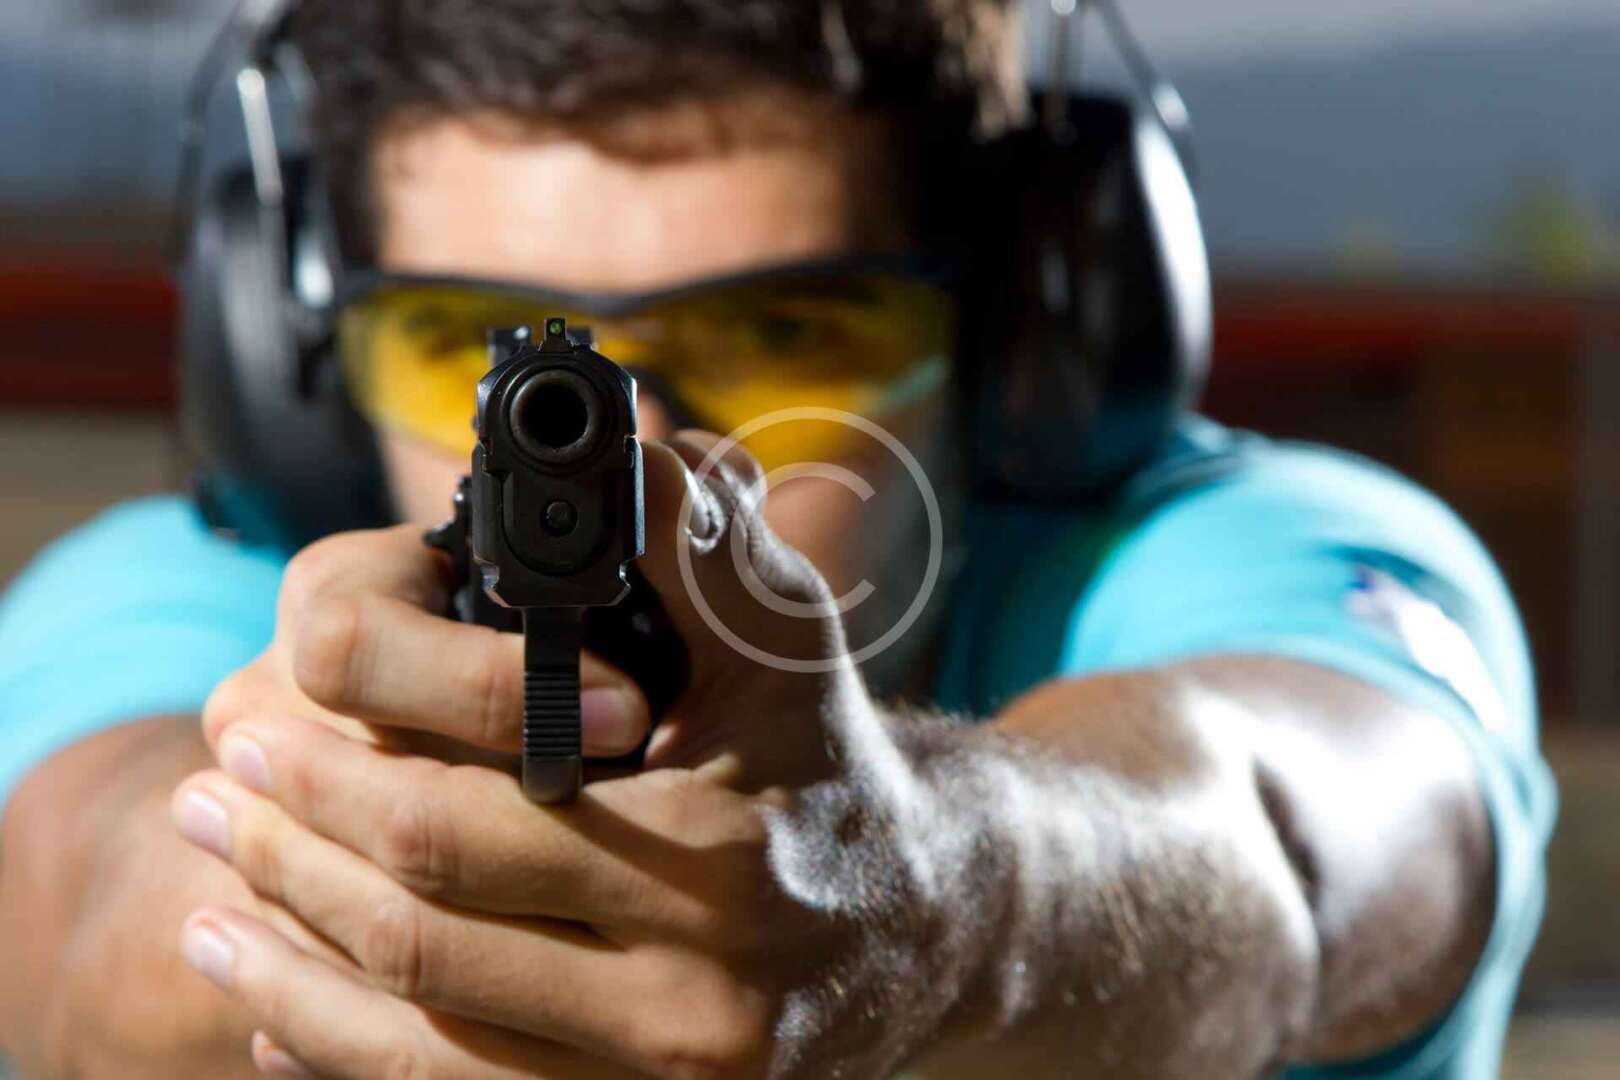 A man is holding a gun and aiming at it.